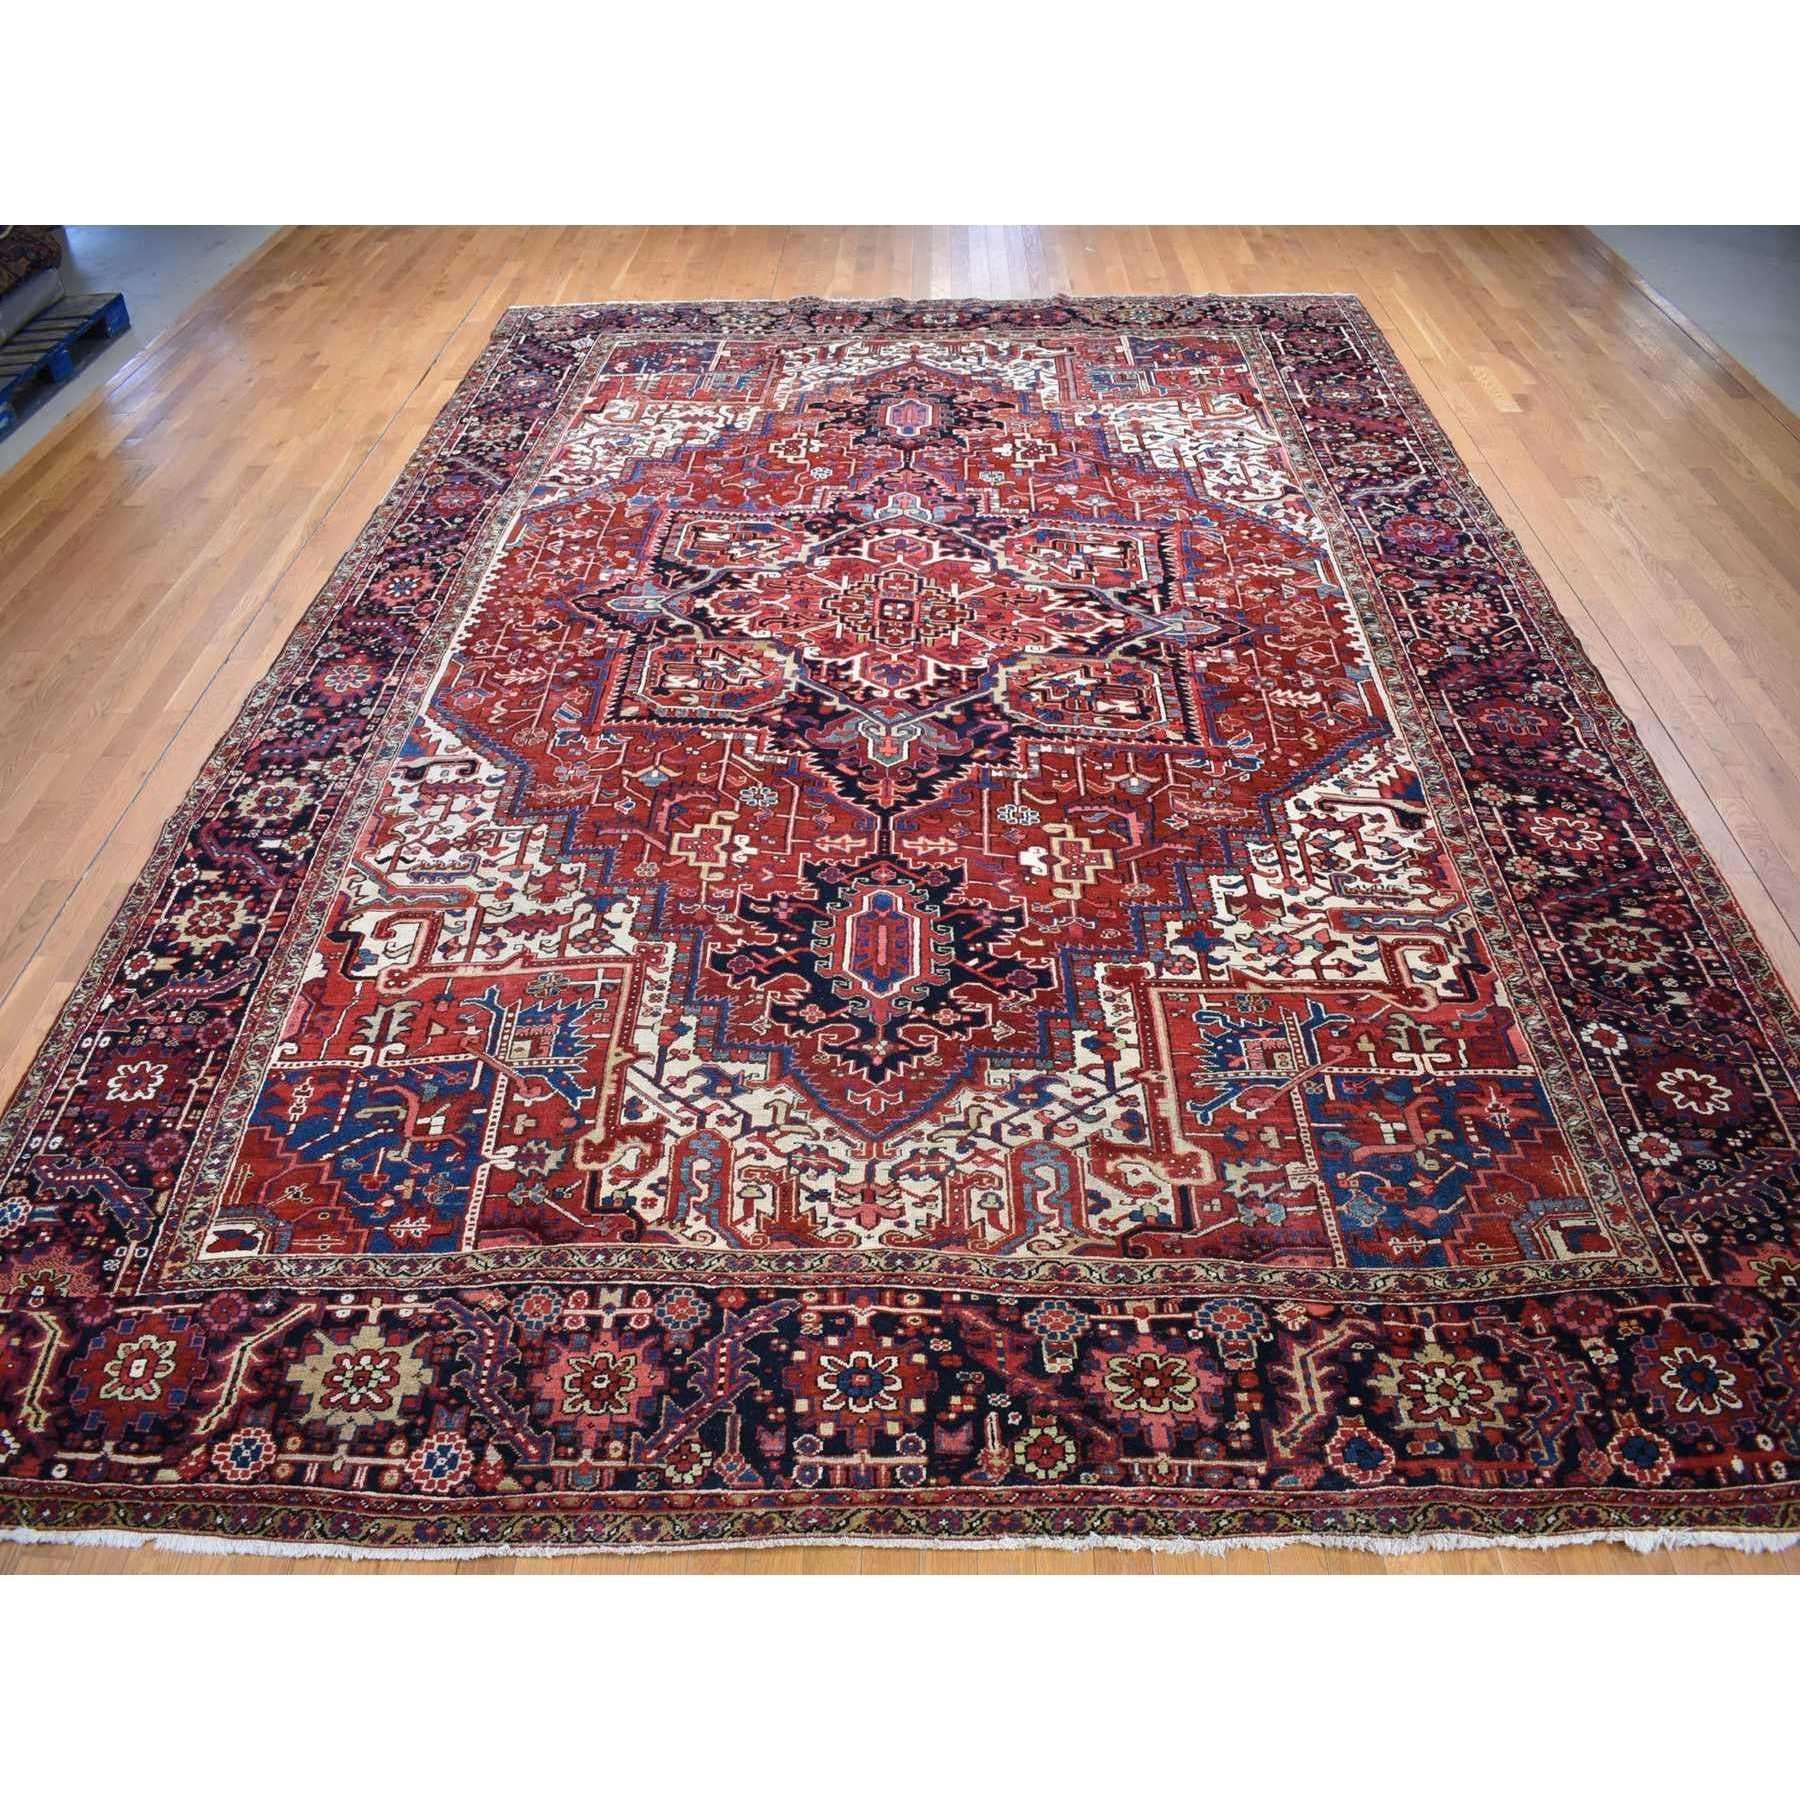 This fabulous Hand-Knotted carpet has been created and designed for extra strength and durability. This rug has been handcrafted for weeks in the traditional method that is used to make
Exact Rug Size in Feet and Inches : 11'5